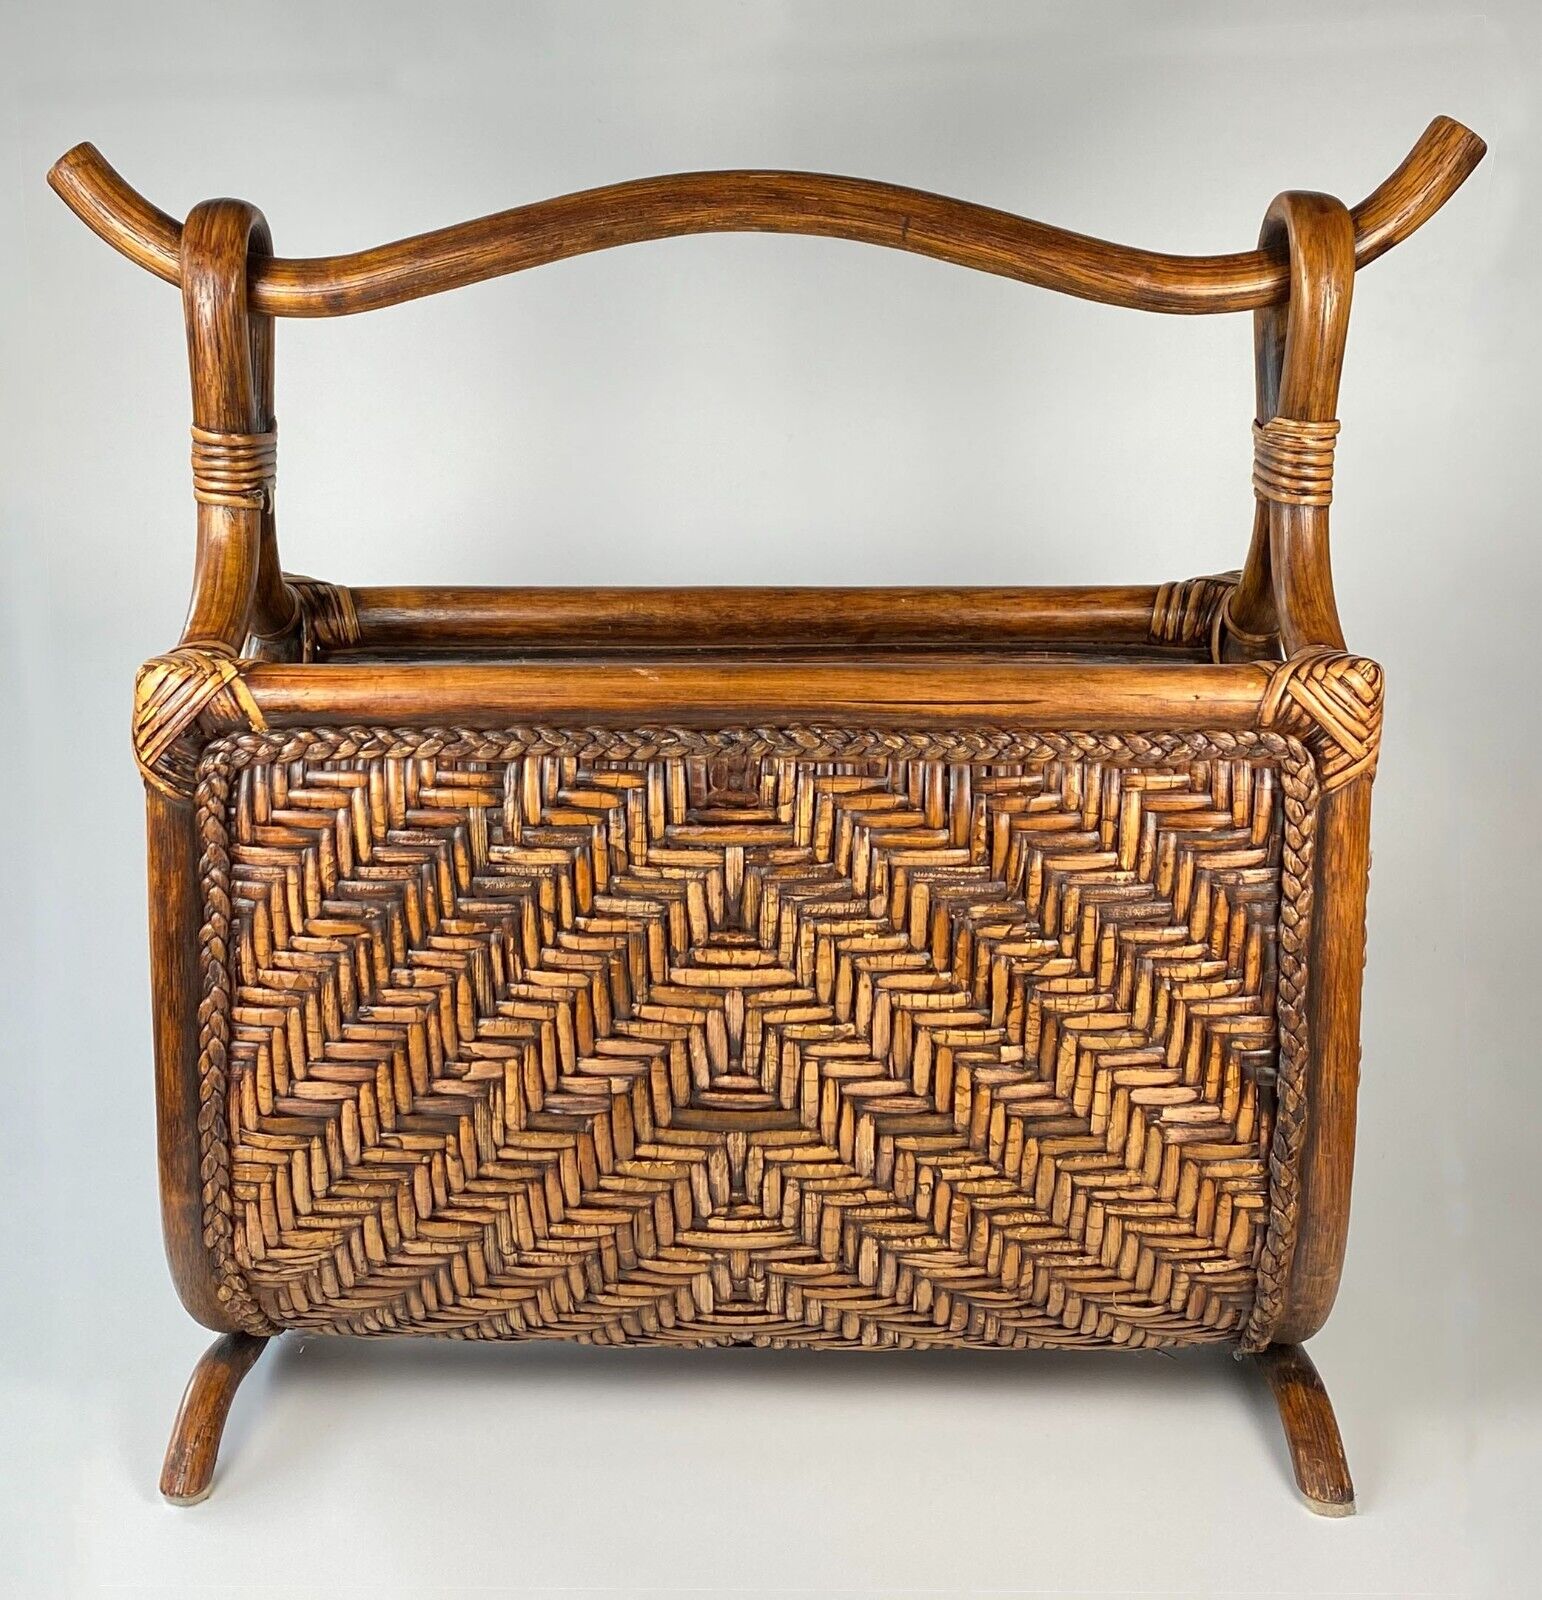 Large Vintage Wicker/Rattan & Wood Basket — For Magazines, Throw Blankets & More